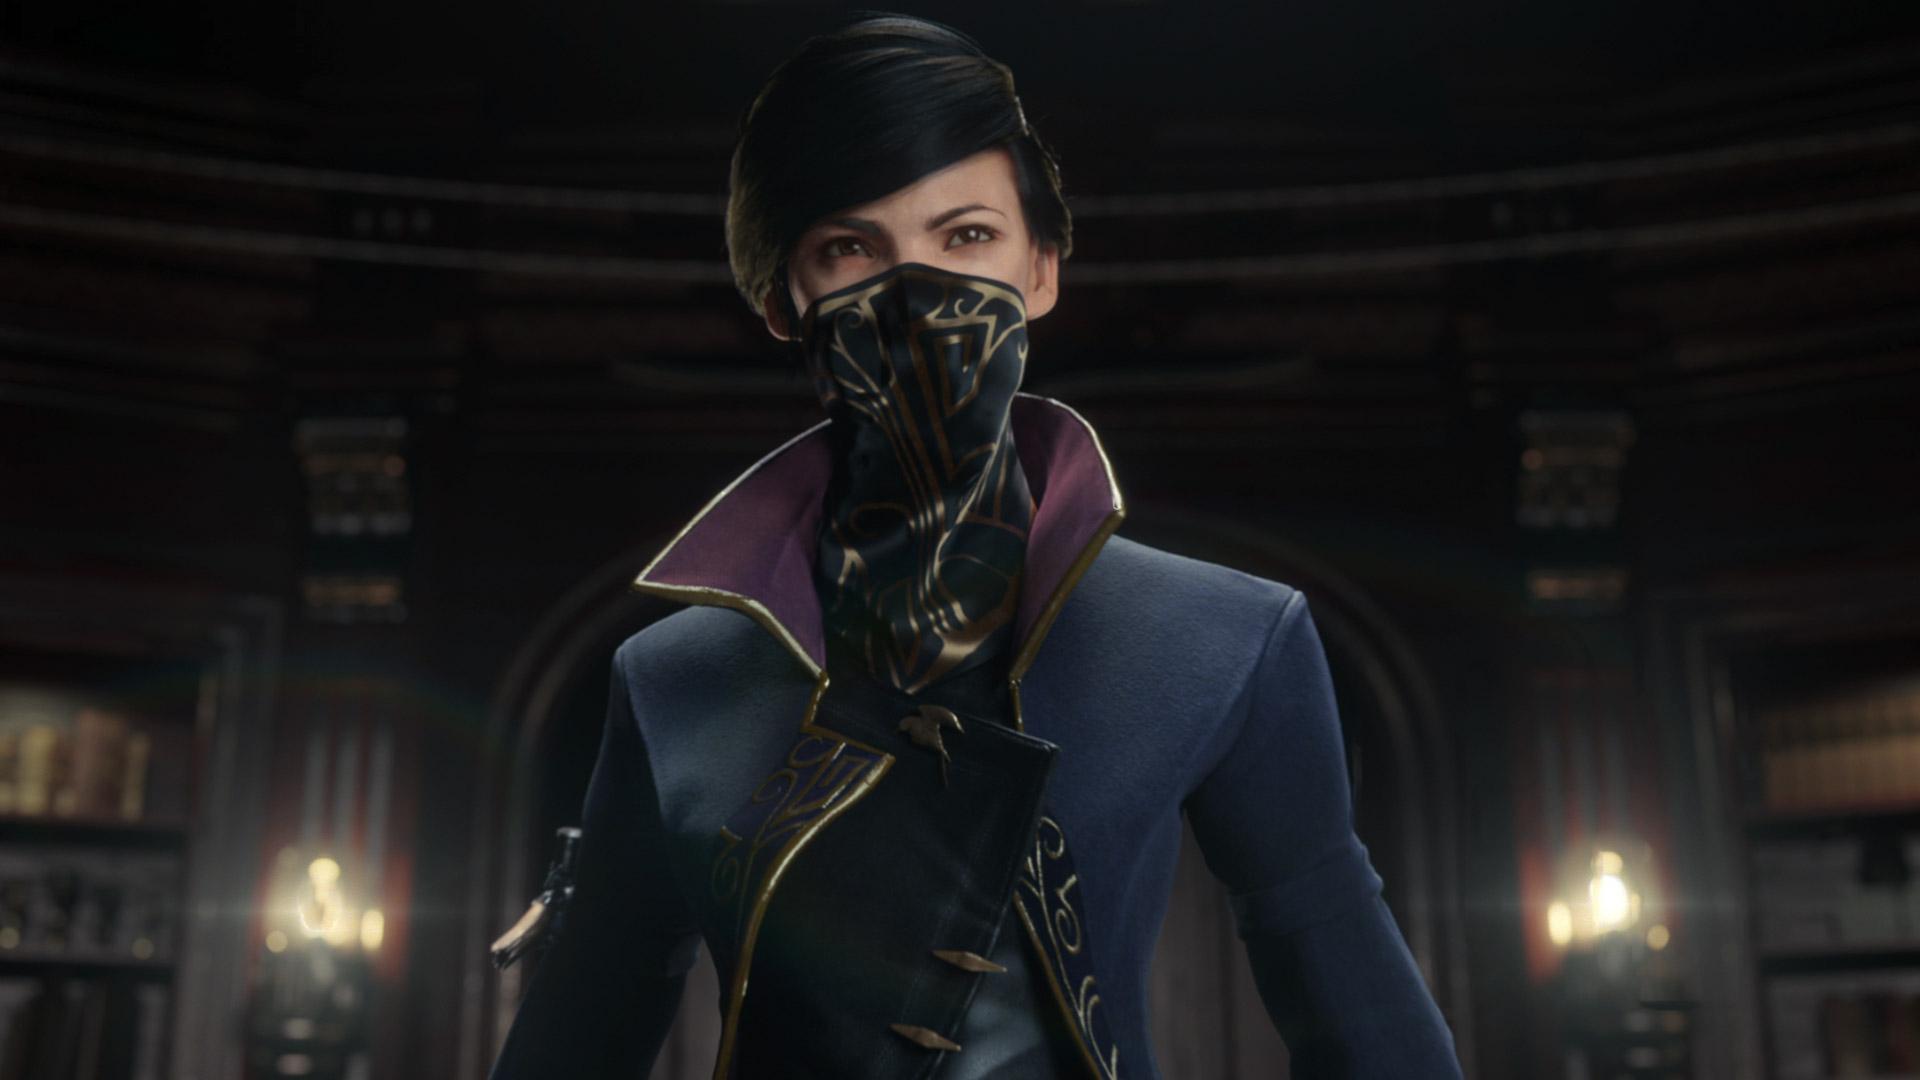 100+] Dishonored 2 Wallpapers | Wallpapers.com